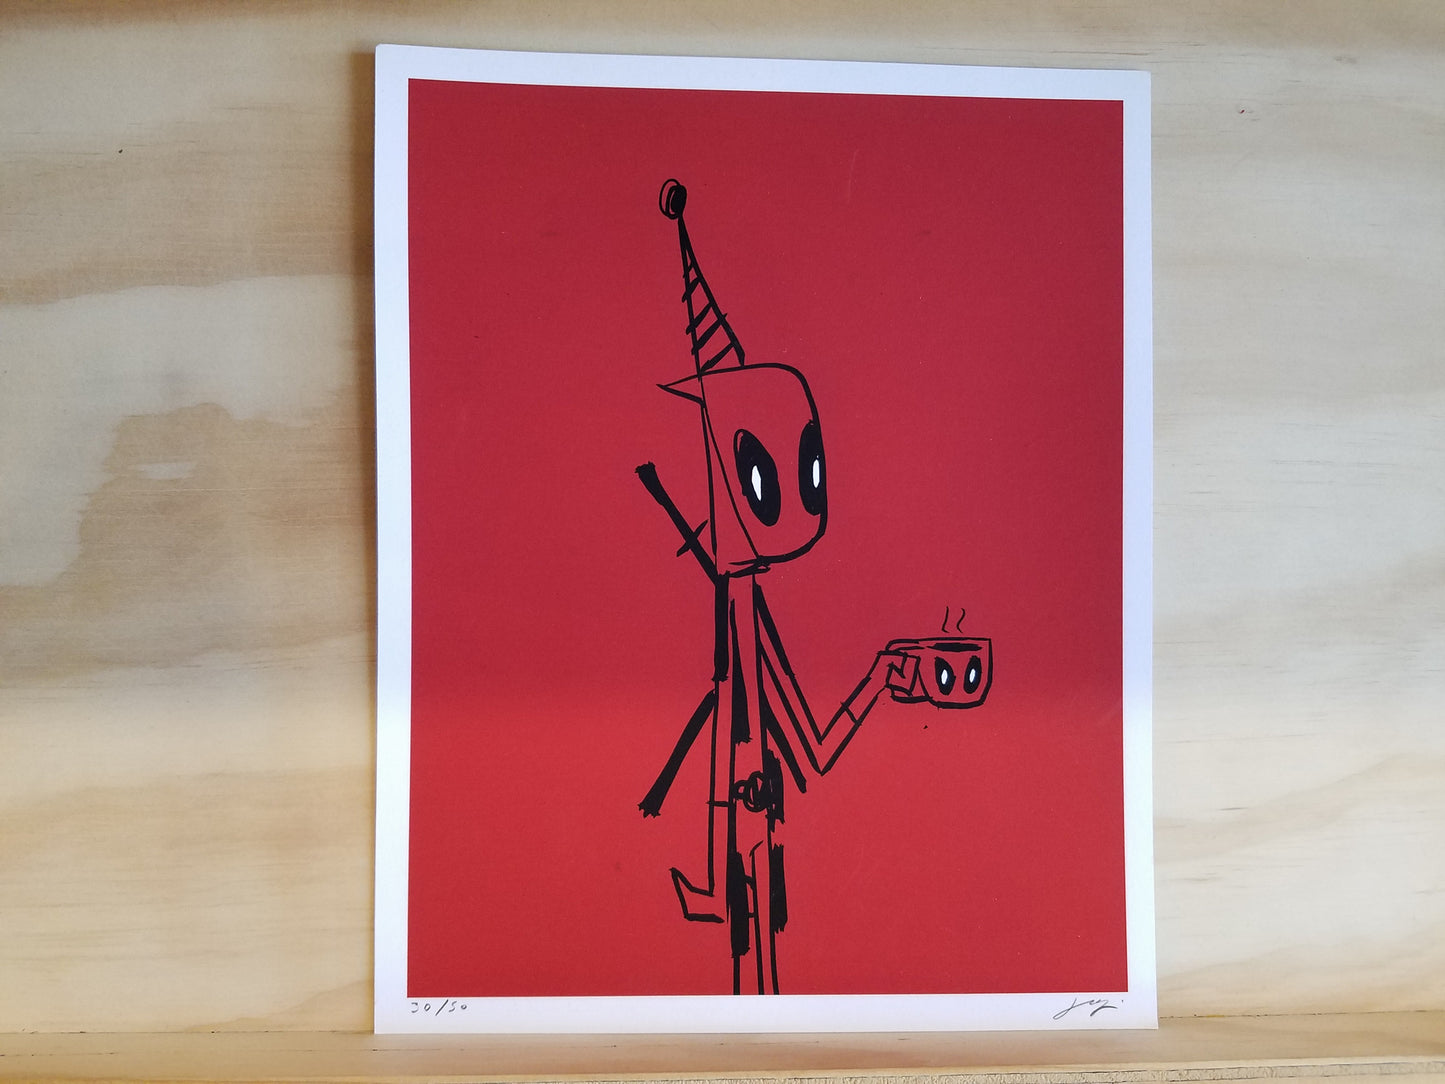 Deadpool Perky Nerd Exclusive Giclee Print by Justin Harder